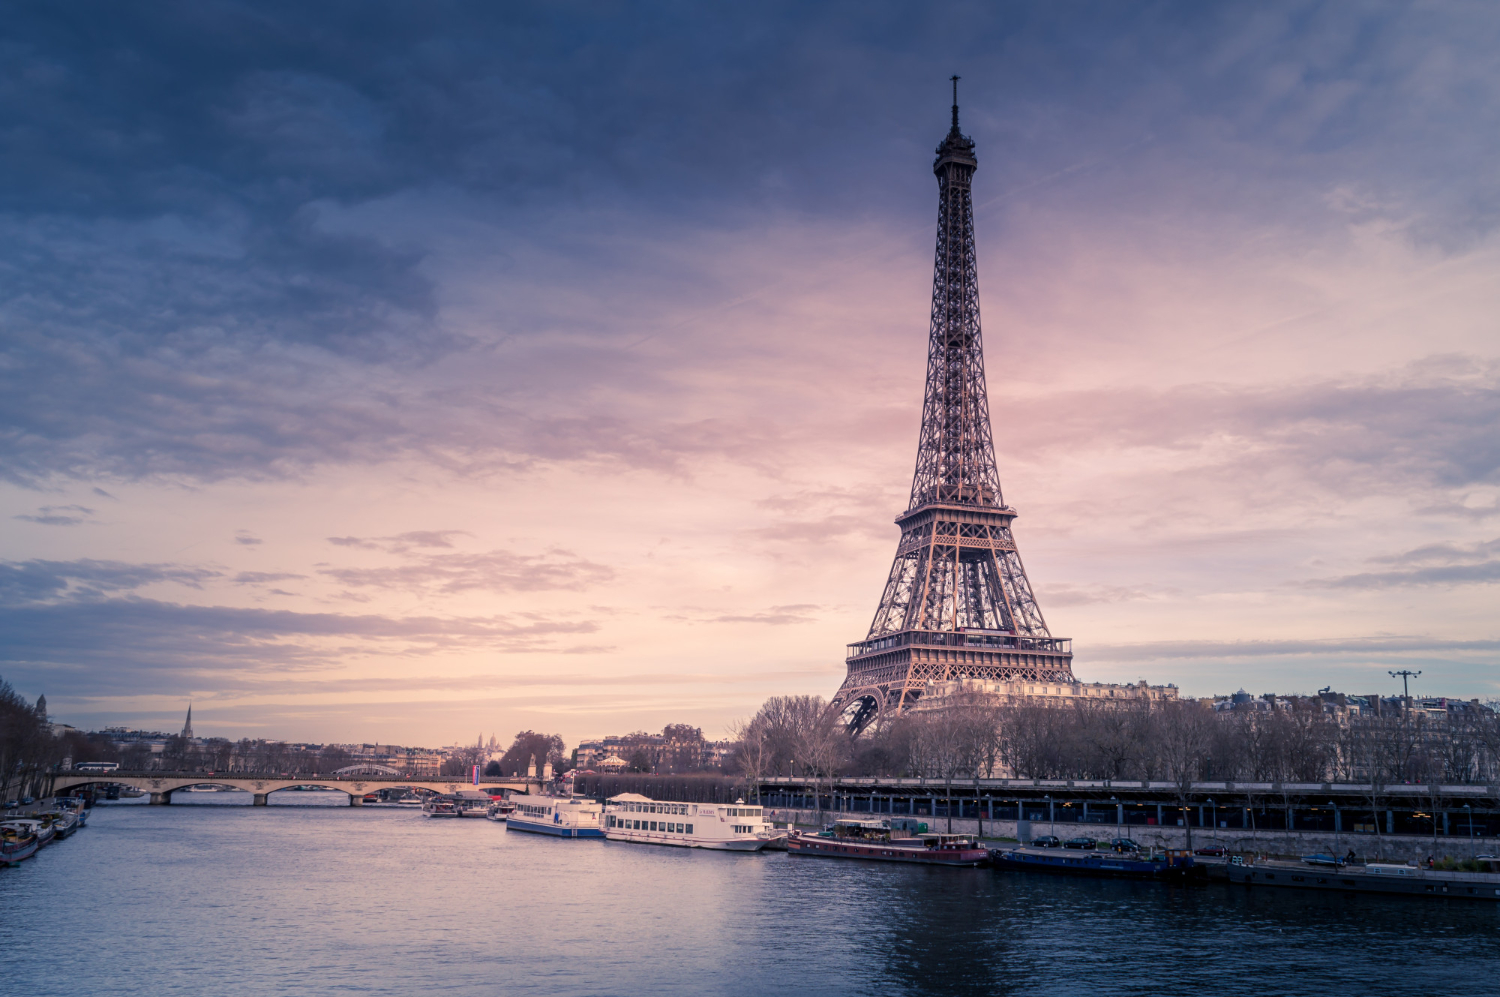 beautiful-wide-shot-eiffel-tower-paris-surrounded-by-water-with-ships-colorful-sky (1)